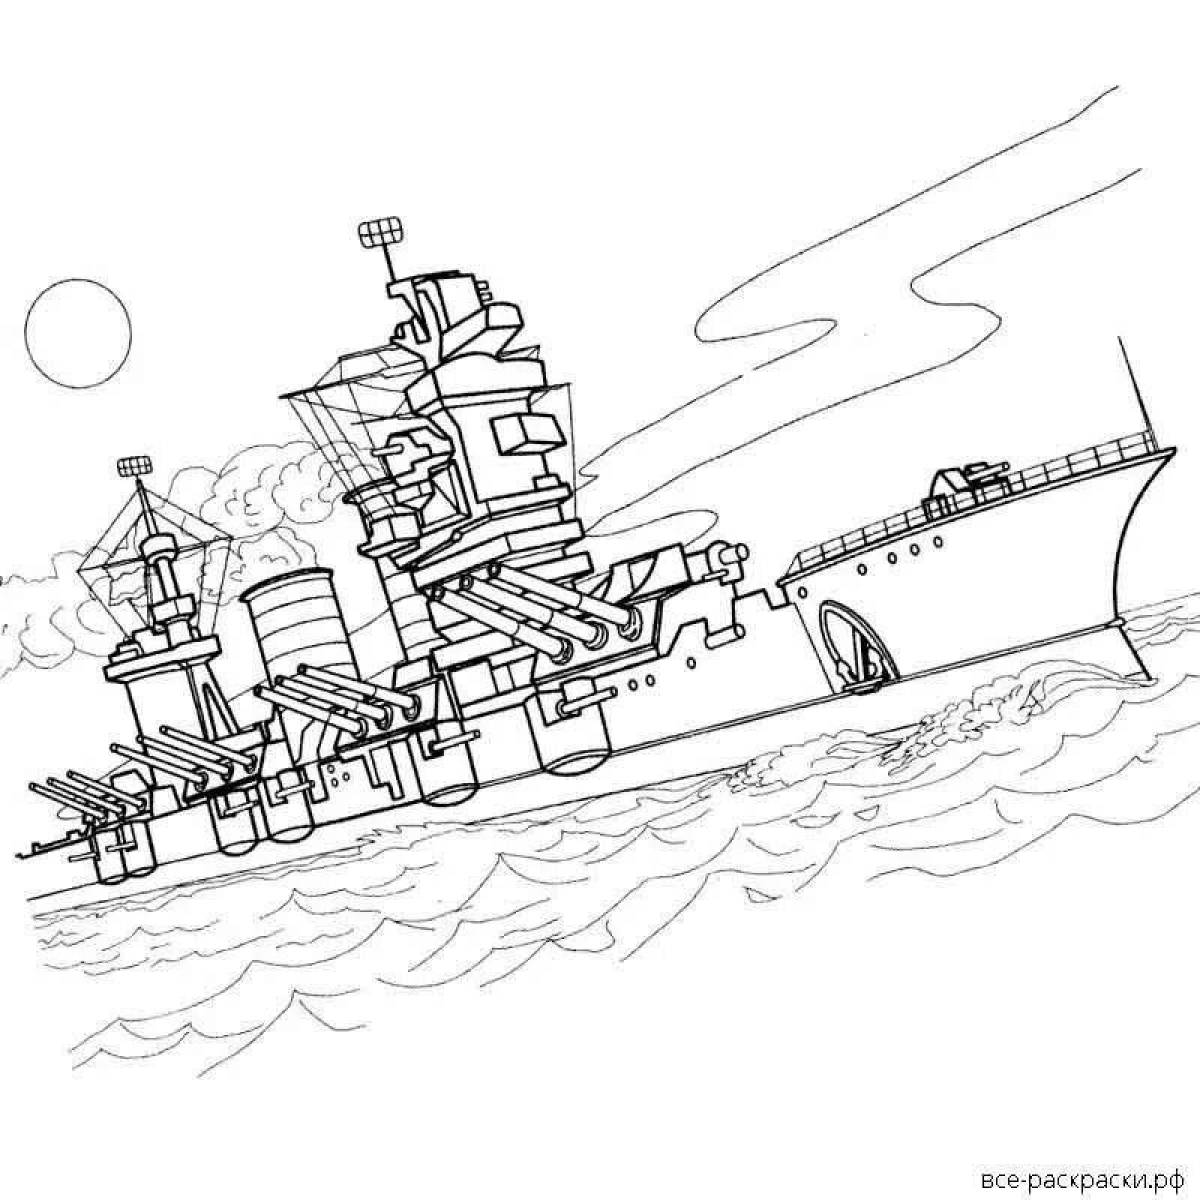 Colorful icebreaker coloring page